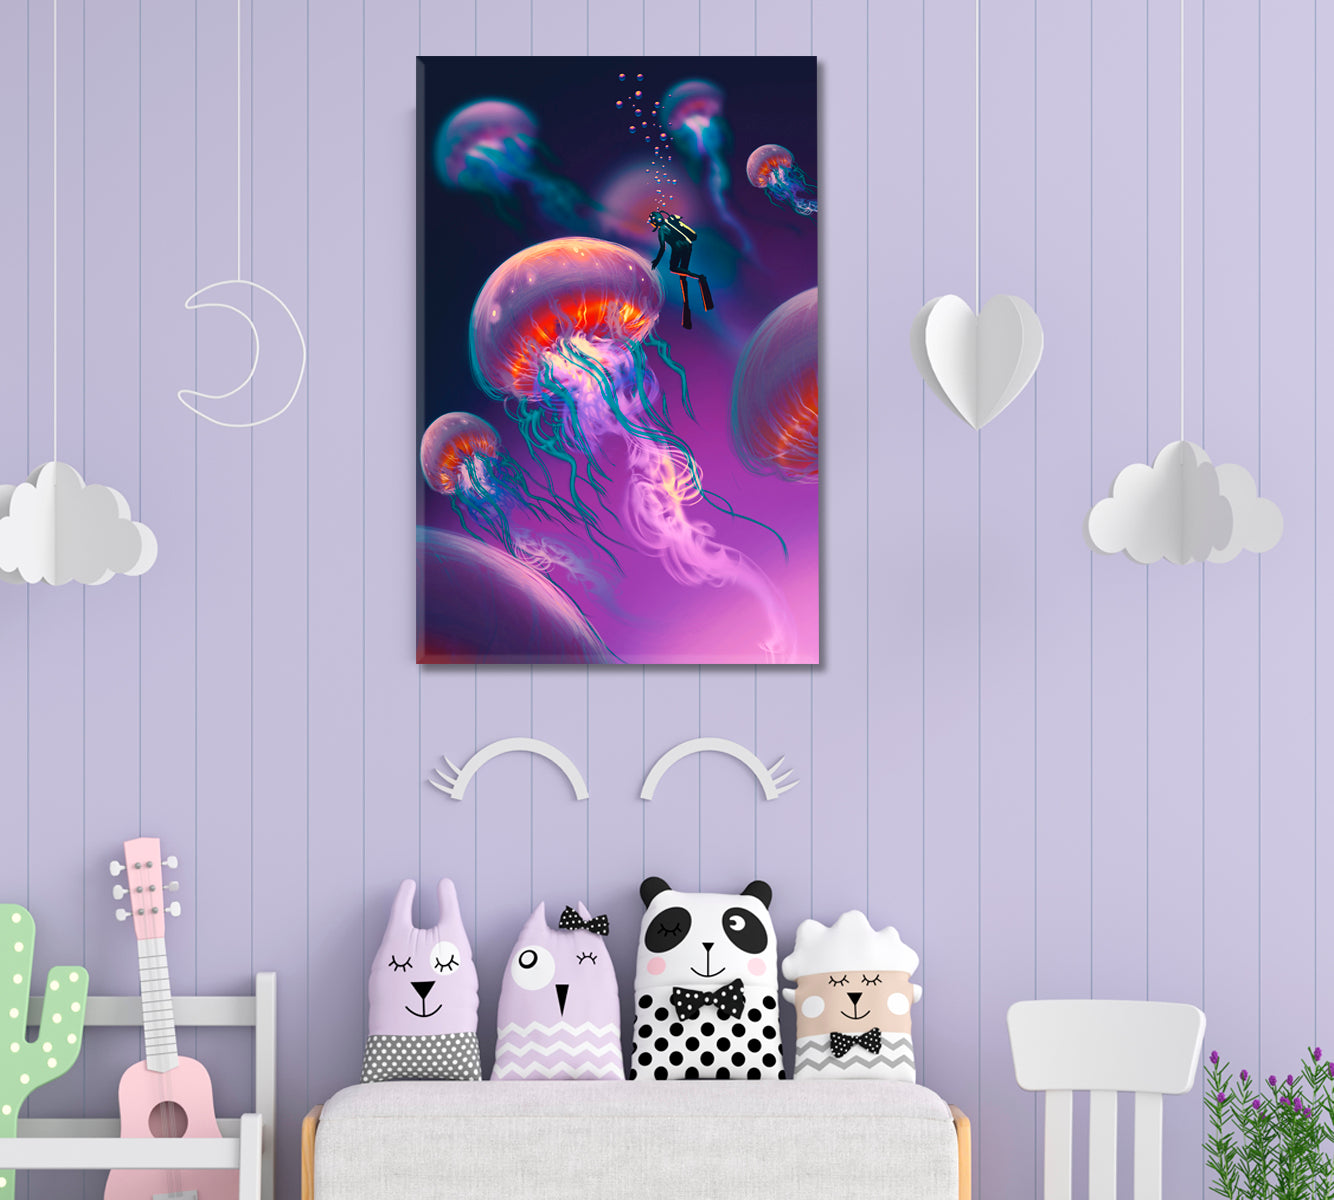 Large Jellyfish and Divers Purple Imagination Underwater Surreal Fantasy Large Art Print Décor Artesty 1 Panel 16"x24" 